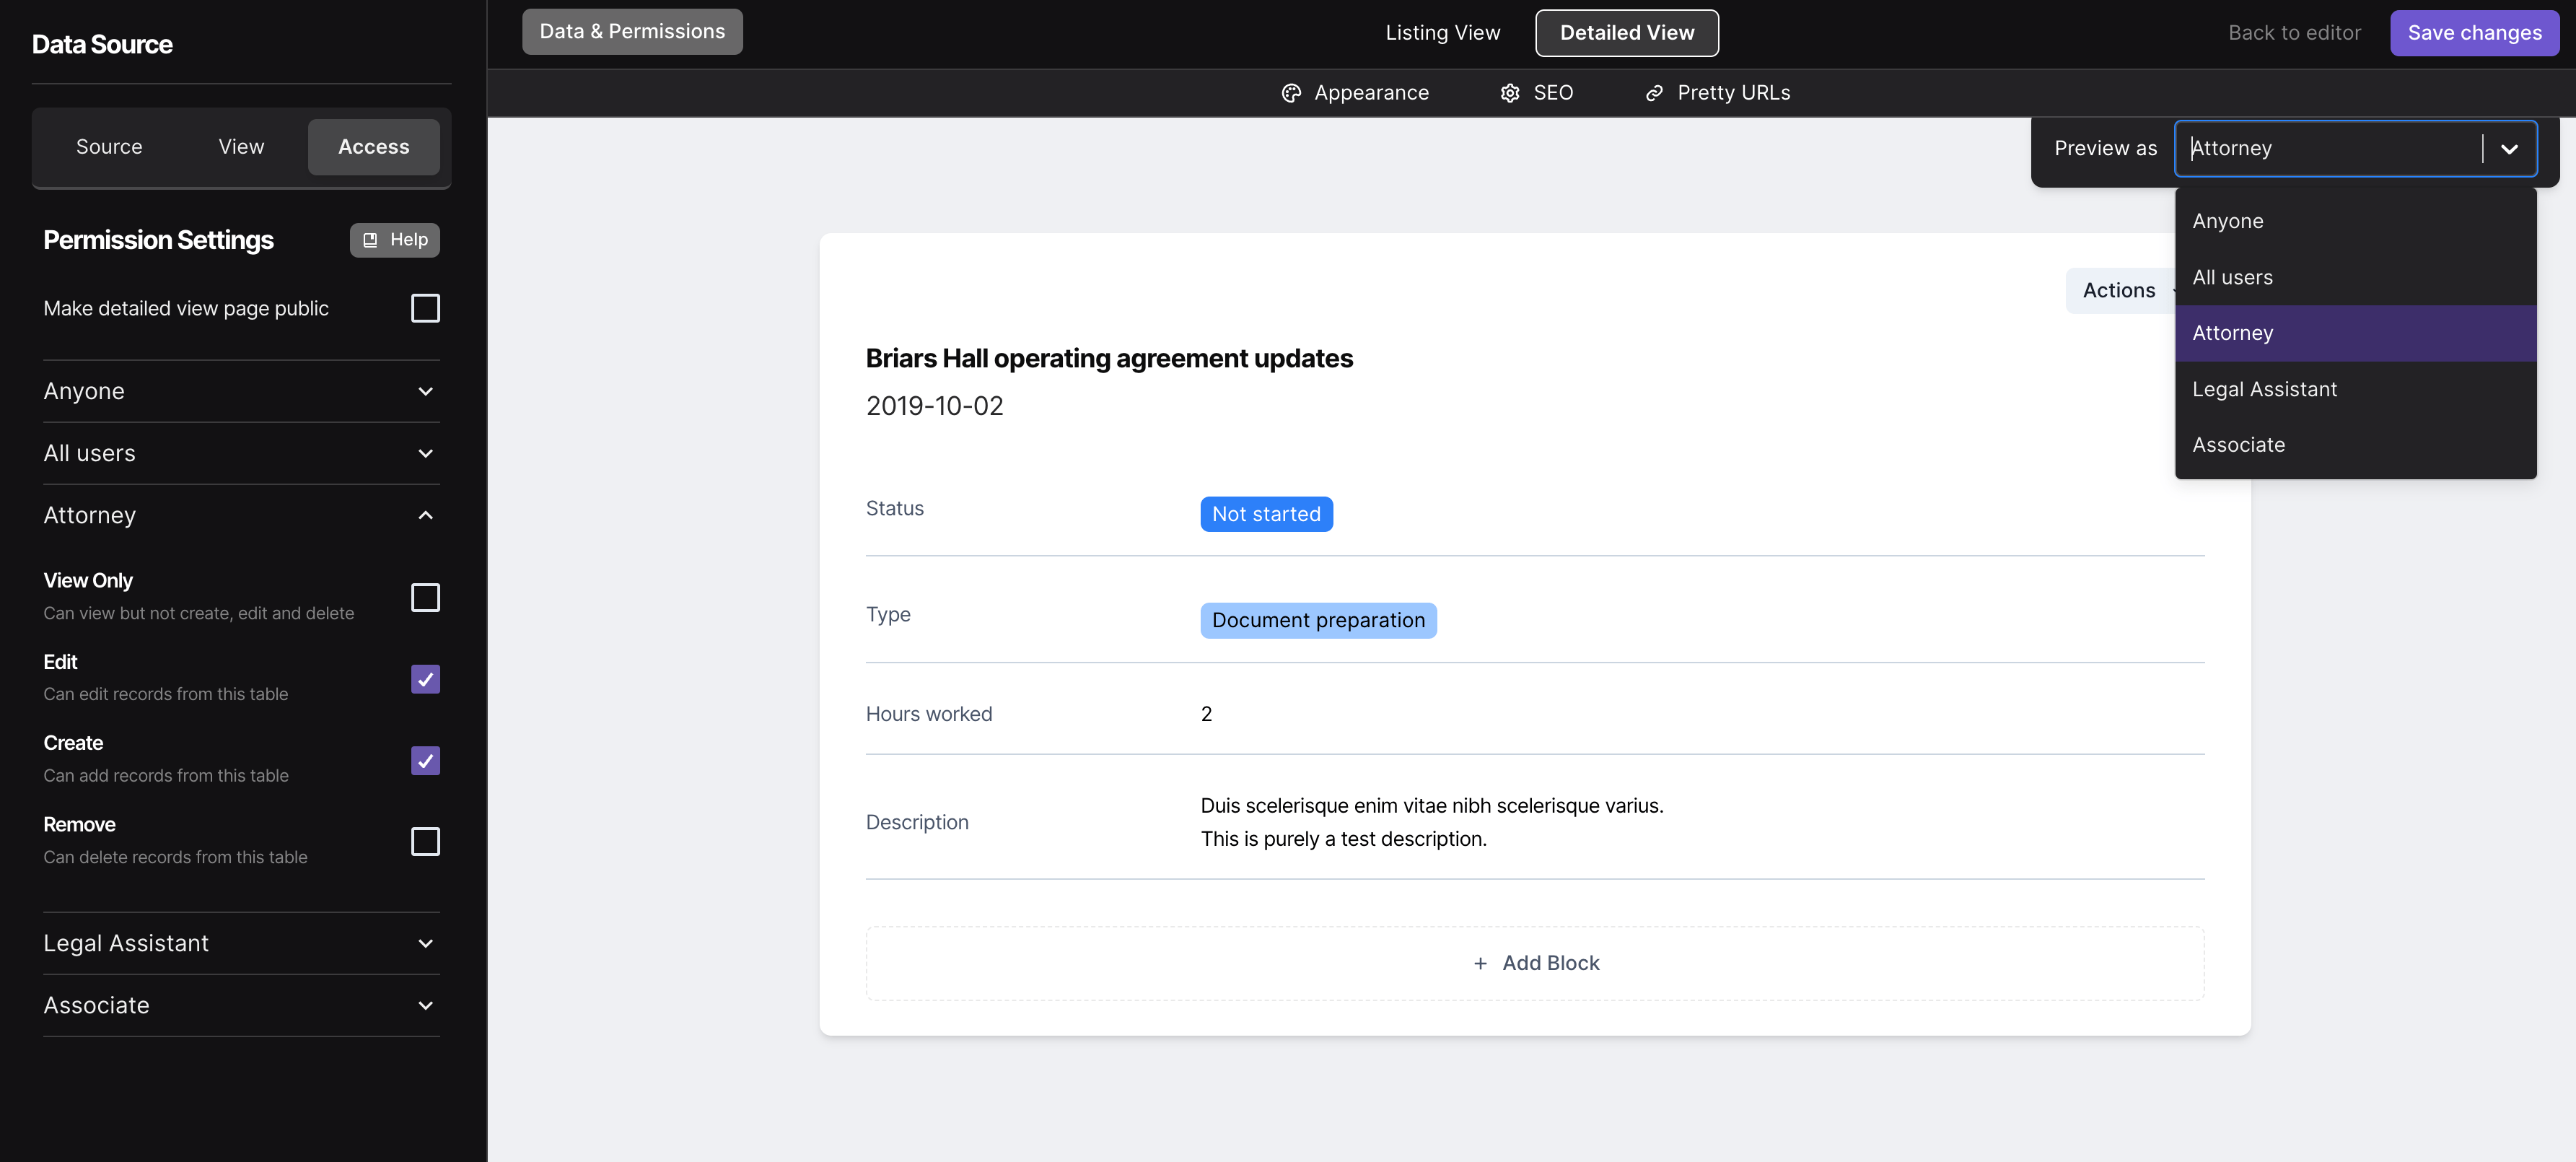 Preview as a user to see the permissions in action